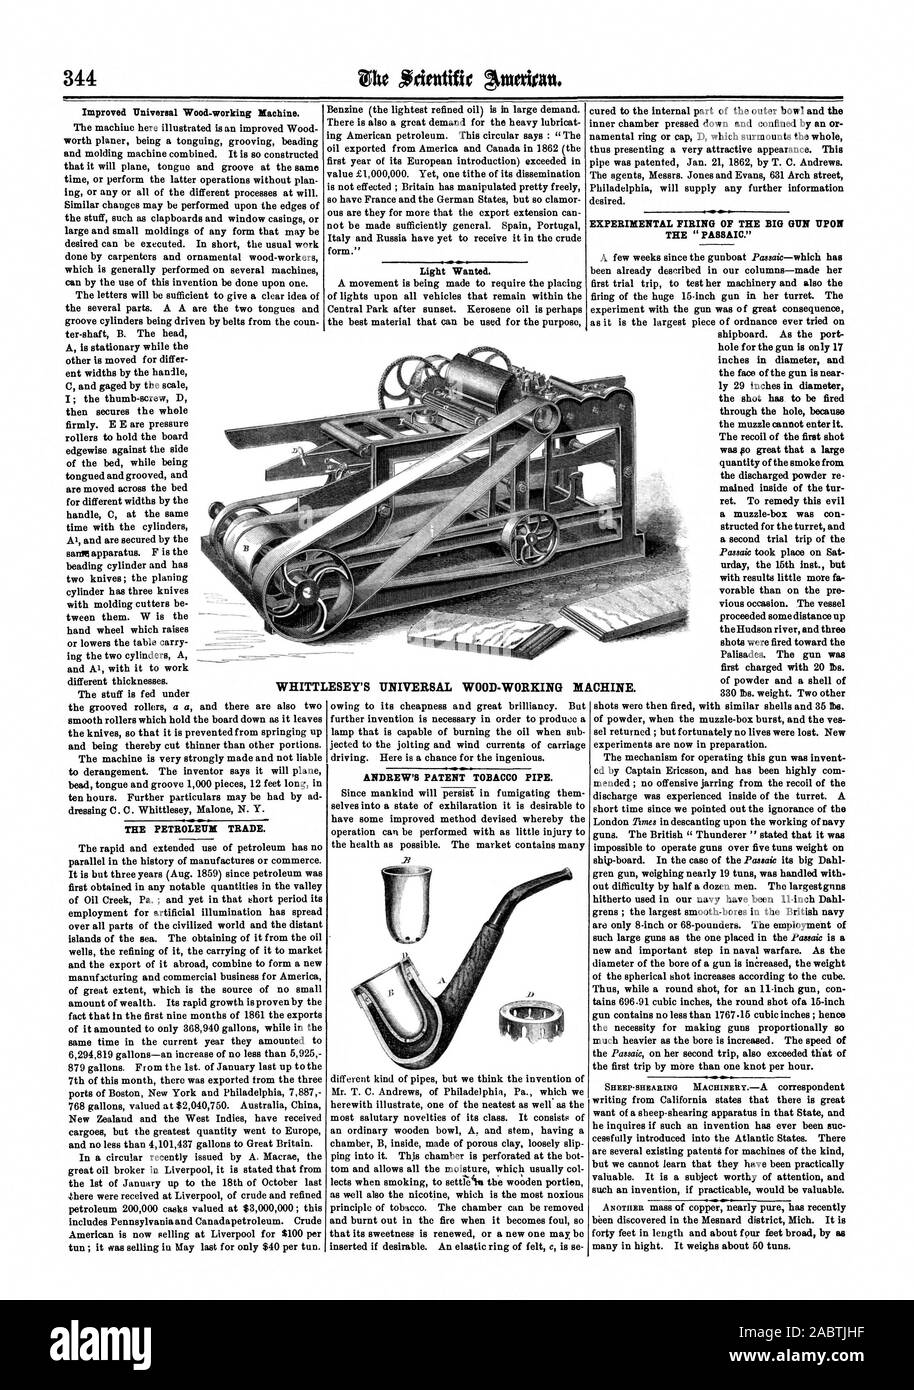 Improved Universal Wood-working Machine. THE PETROLEUM TRADE. ANDREW'S PATENT TOBACCO PIPE. EXPERIMENTAL FIRING OF THE BIG GUN UPON THE ' PASSAIC.' WHITTL ESEY'S UNIVERSAL WOOD-WORKING DI ACHINE., scientific american, 1862-11-29 Stock Photo